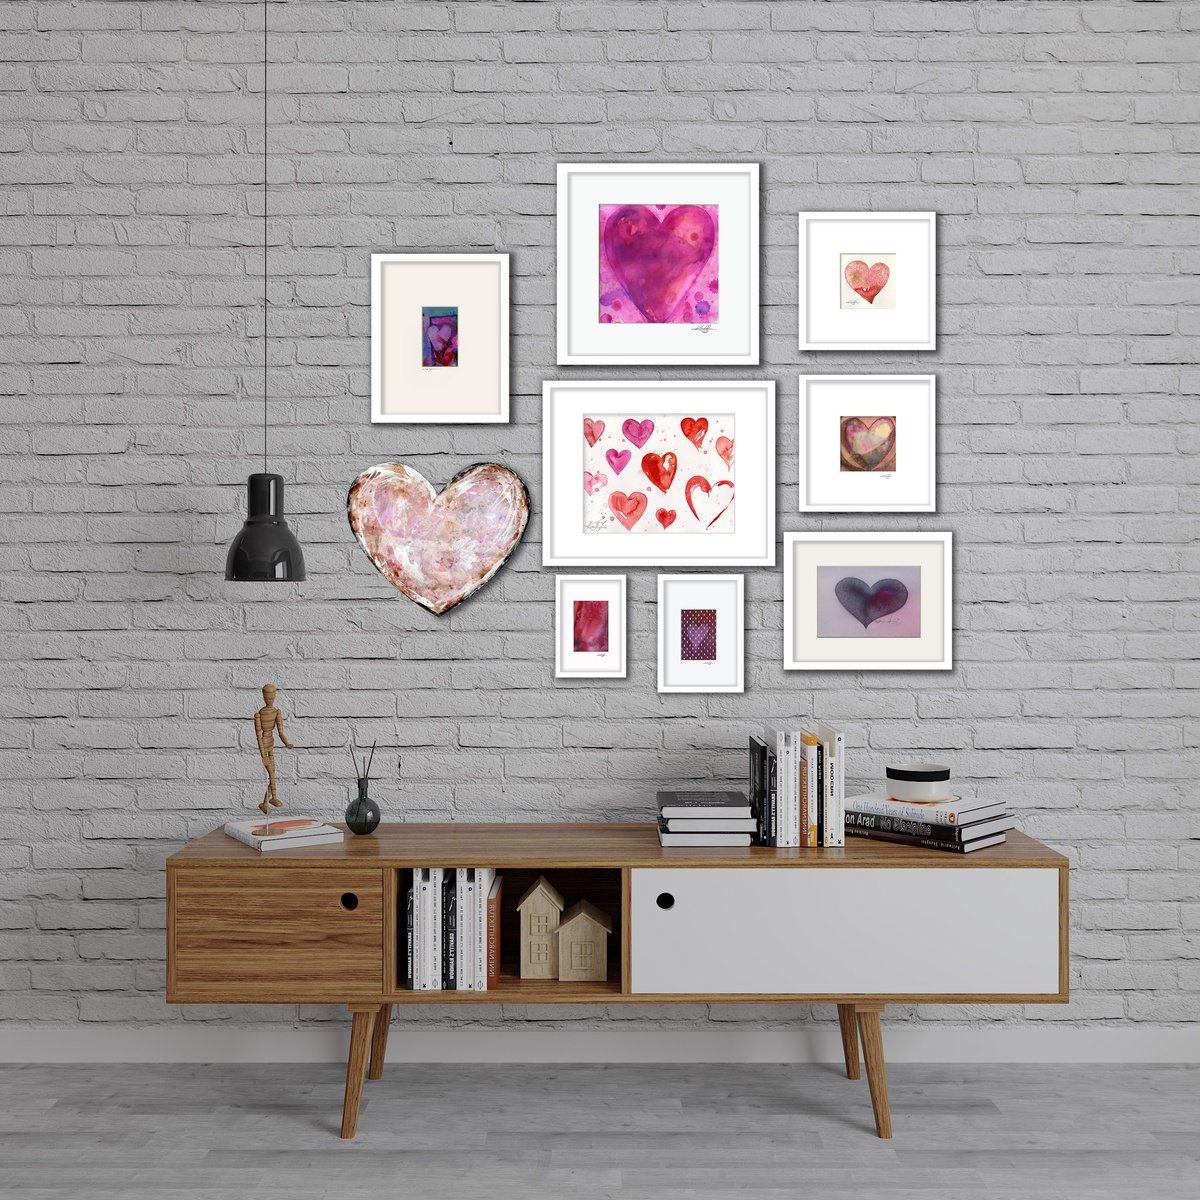 Heart Gallery Wall Collection 1 - 9 Heart Paintings by Kathy Morton Stanion by Kathy Morton Stanion